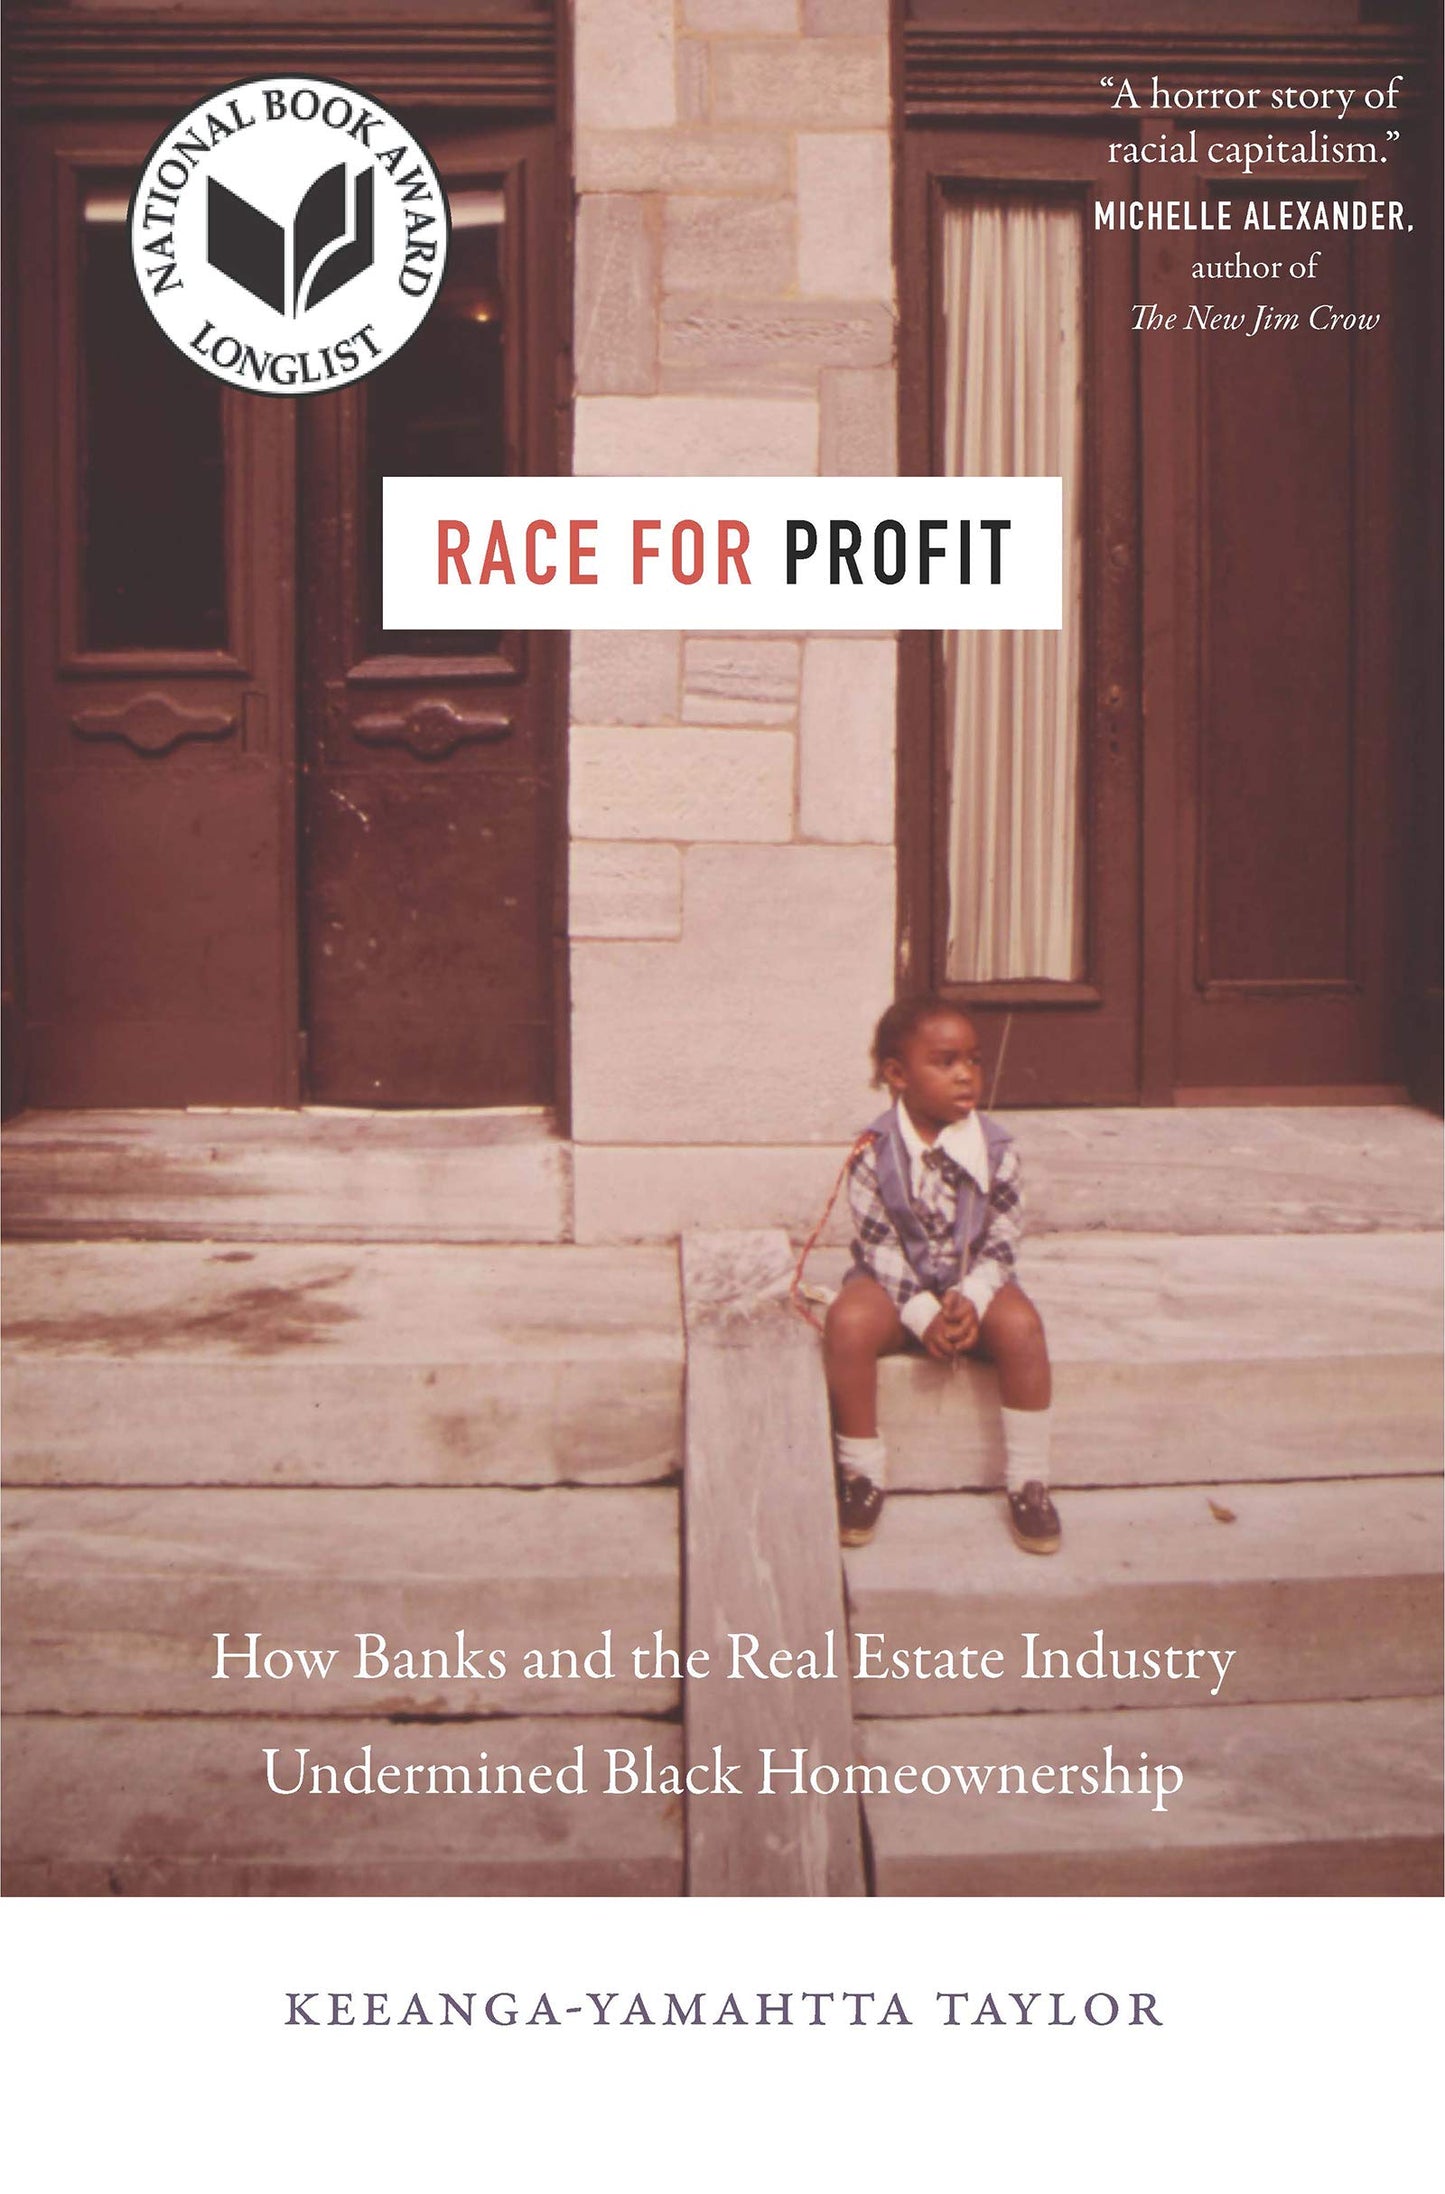 Race for Profit // How Banks & the Real Estate Industry Undermined Black Homeownership